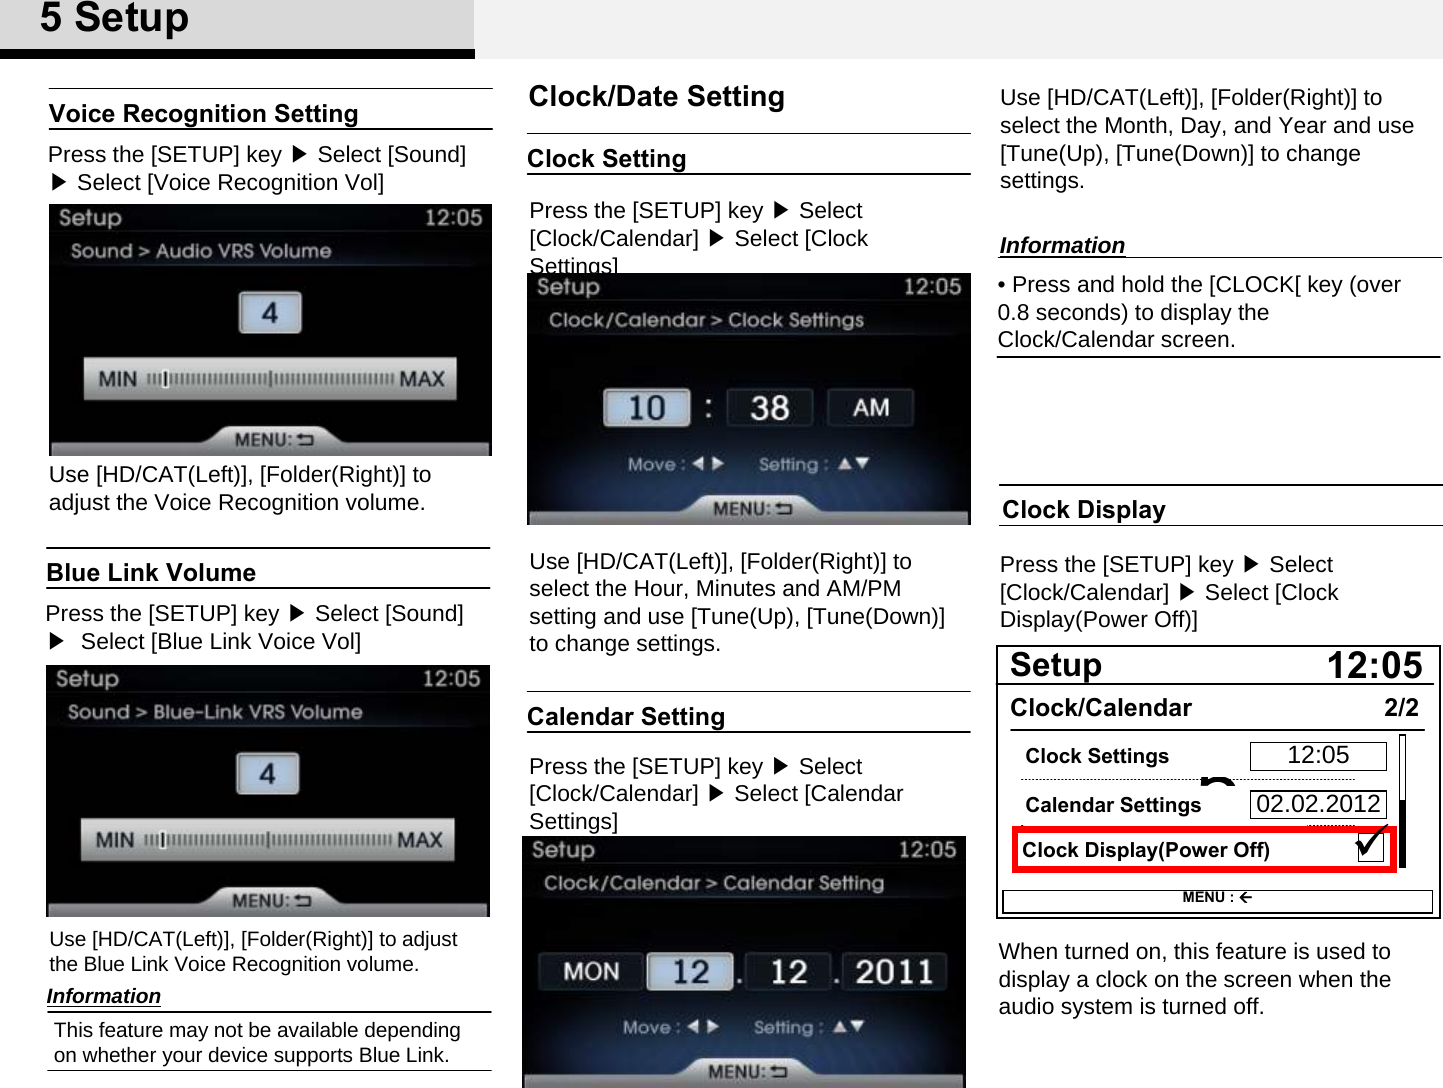 Clock SettingPress the [SETUP] key ▶Select [Clock/Calendar] ▶Select [Clock Settings] Use [HD/CAT(Left)], [Folder(Right)] to select the Hour, Minutes and AM/PM setting and use [Tune(Up), [Tune(Down)] to change settings. Clock/Date SettingCalendar SettingPress the [SETUP] key ▶Select [Clock/Calendar] ▶Select [Calendar Settings] Use [HD/CAT(Left)], [Folder(Right)] to select the Month, Day, and Year and use [Tune(Up), [Tune(Down)] to change settings. Clock DisplayPress the [SETUP] key ▶Select [Clock/Calendar] ▶Select [Clock Display(Power Off)]When turned on, this feature is used to display a clock on the screen when the audio system is turned off. 512:05SetupClock/CalendarClock Display(Power Off)2/2MENU : Calendar SettingsClock Settings 12:0502.02.2012Blue Link VolumePress the [SETUP] key ▶Select [Sound] ▶ Select [Blue Link Voice Vol]Use [HD/CAT(Left)], [Folder(Right)] to adjust the Blue Link Voice Recognition volume. Voice Recognition SettingPress the [SETUP] key ▶Select [Sound] ▶Select [Voice Recognition Vol]Use [HD/CAT(Left)], [Folder(Right)] to adjust the Voice Recognition volume. InformationThis feature may not be available depending on whether your device supports Blue Link. • Press and hold the [CLOCK[ key (over 0.8 seconds) to display the Clock/Calendar screen. Information5Setup